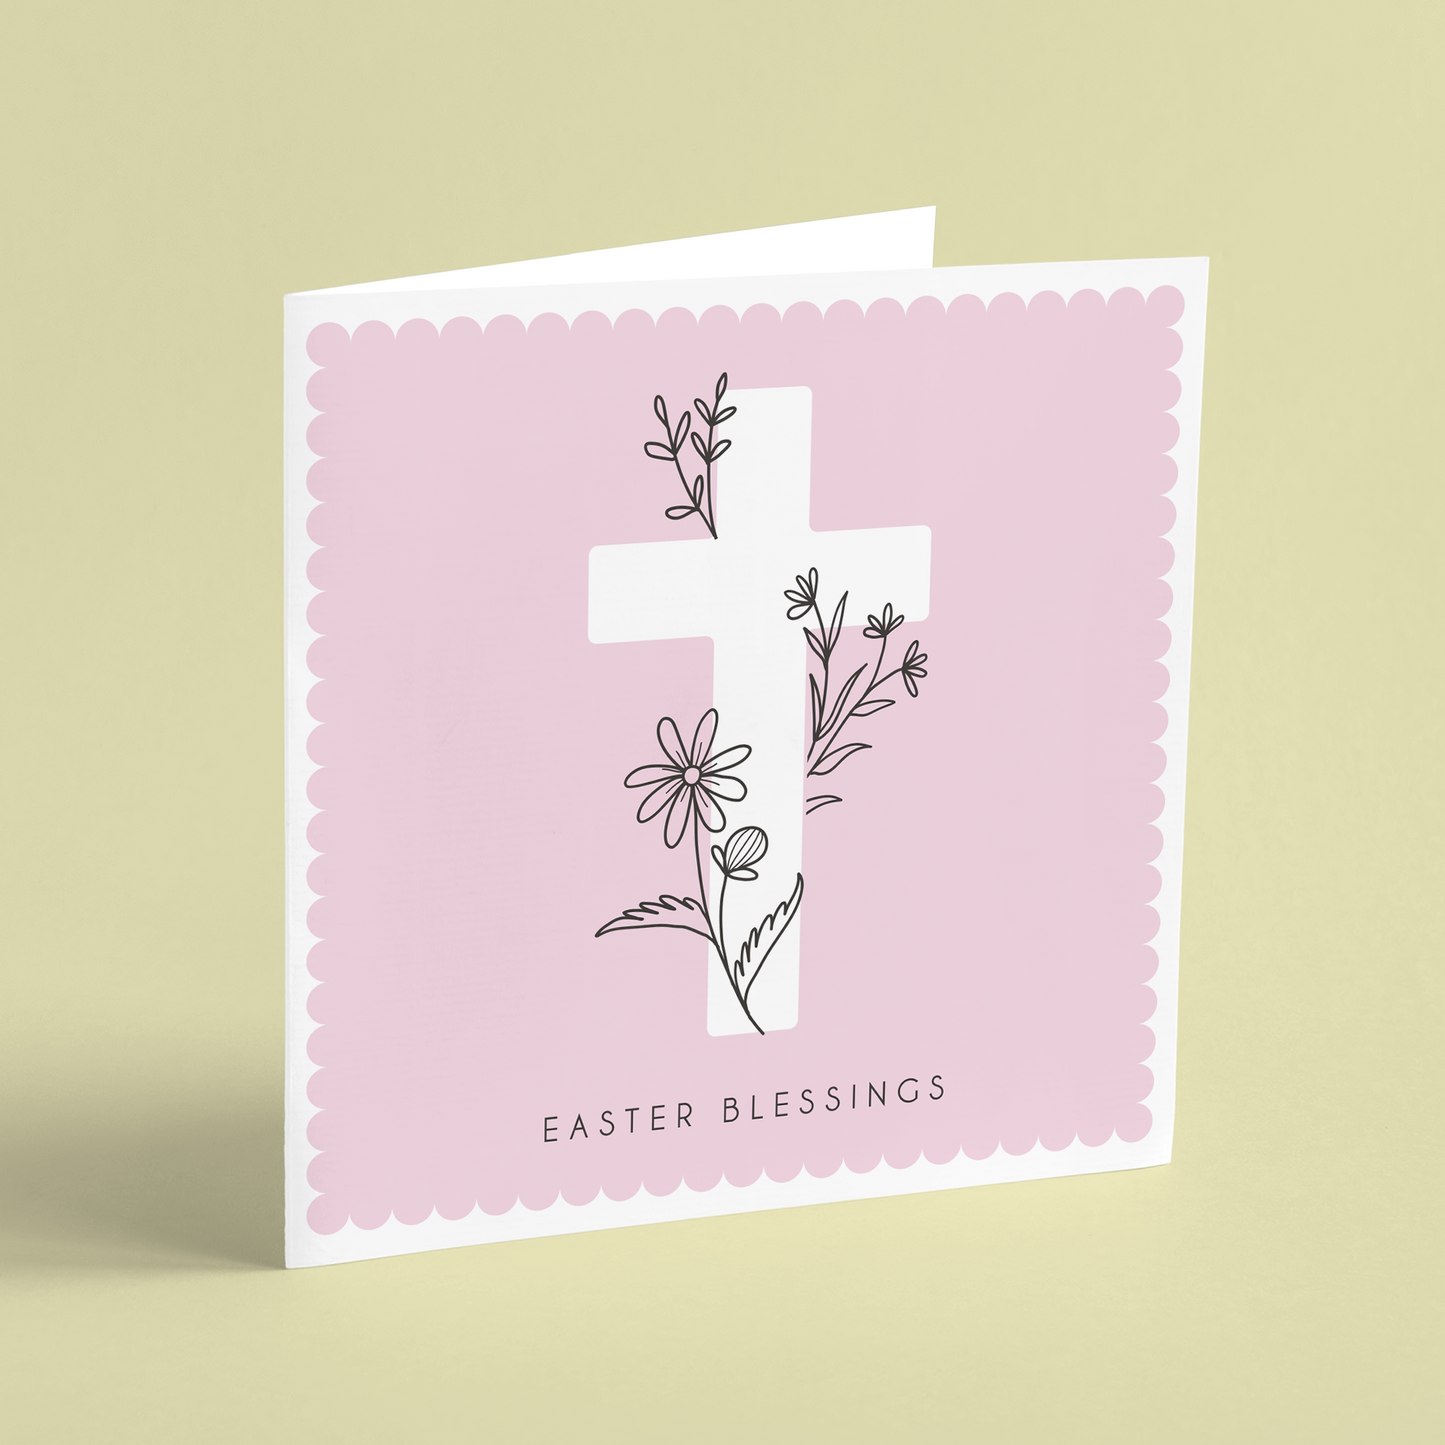 A square Easter card featuring a white cross on a pink background illustrated with floral outlines and reading 'Easter Blessings'.